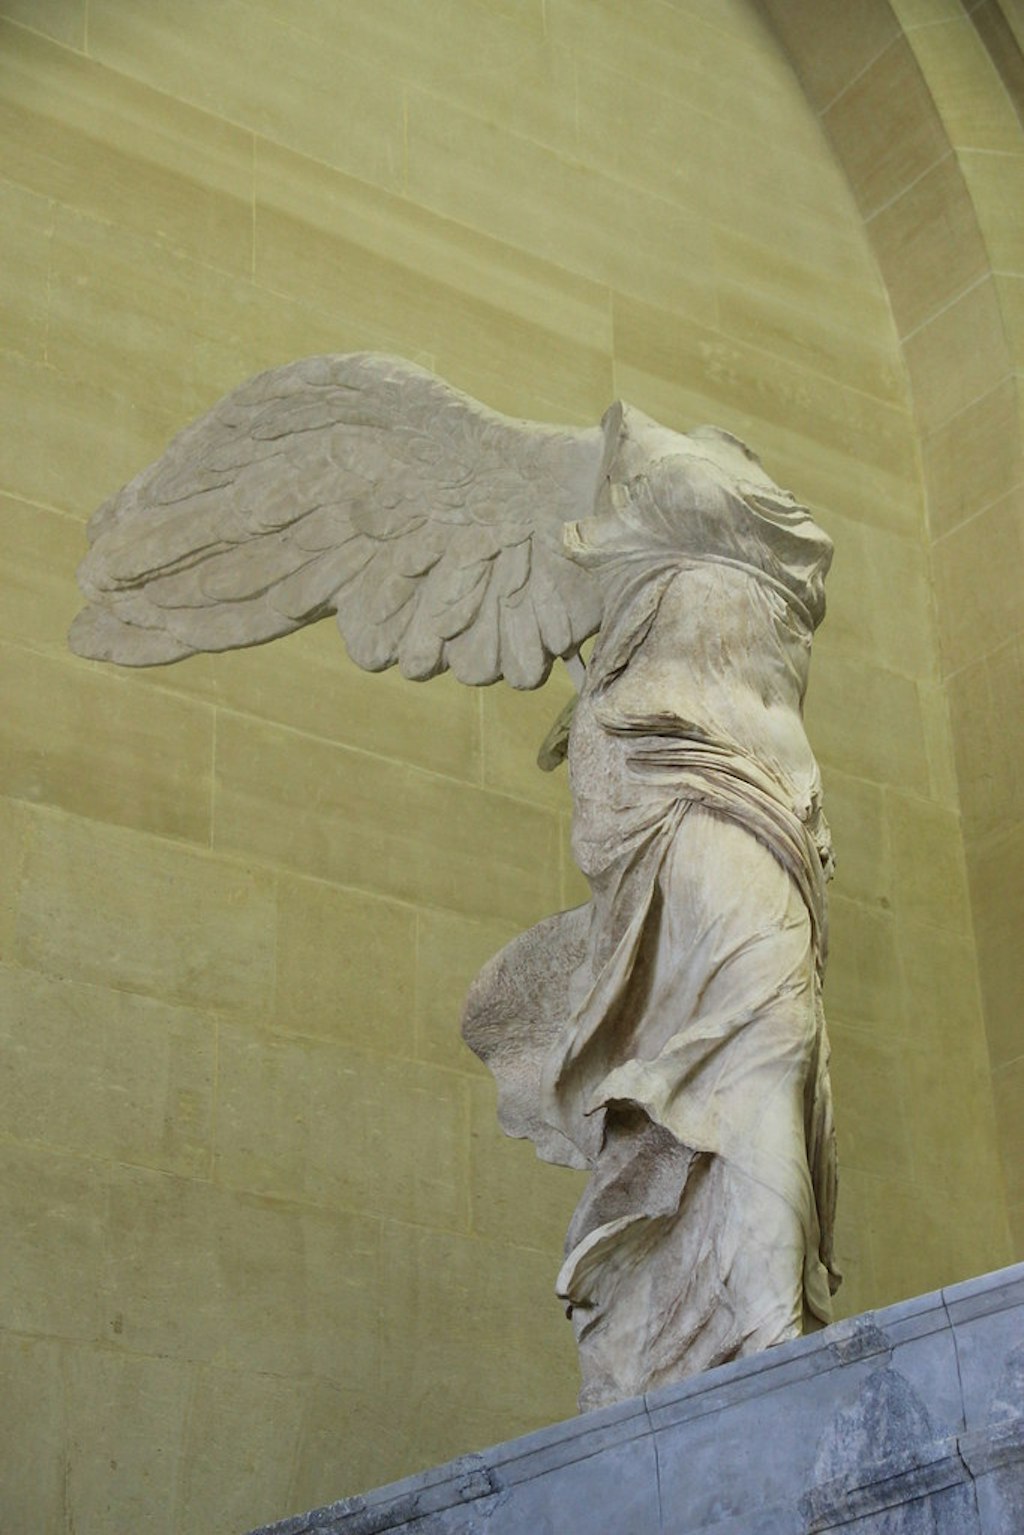 A marble statue of a headless figure with wings.